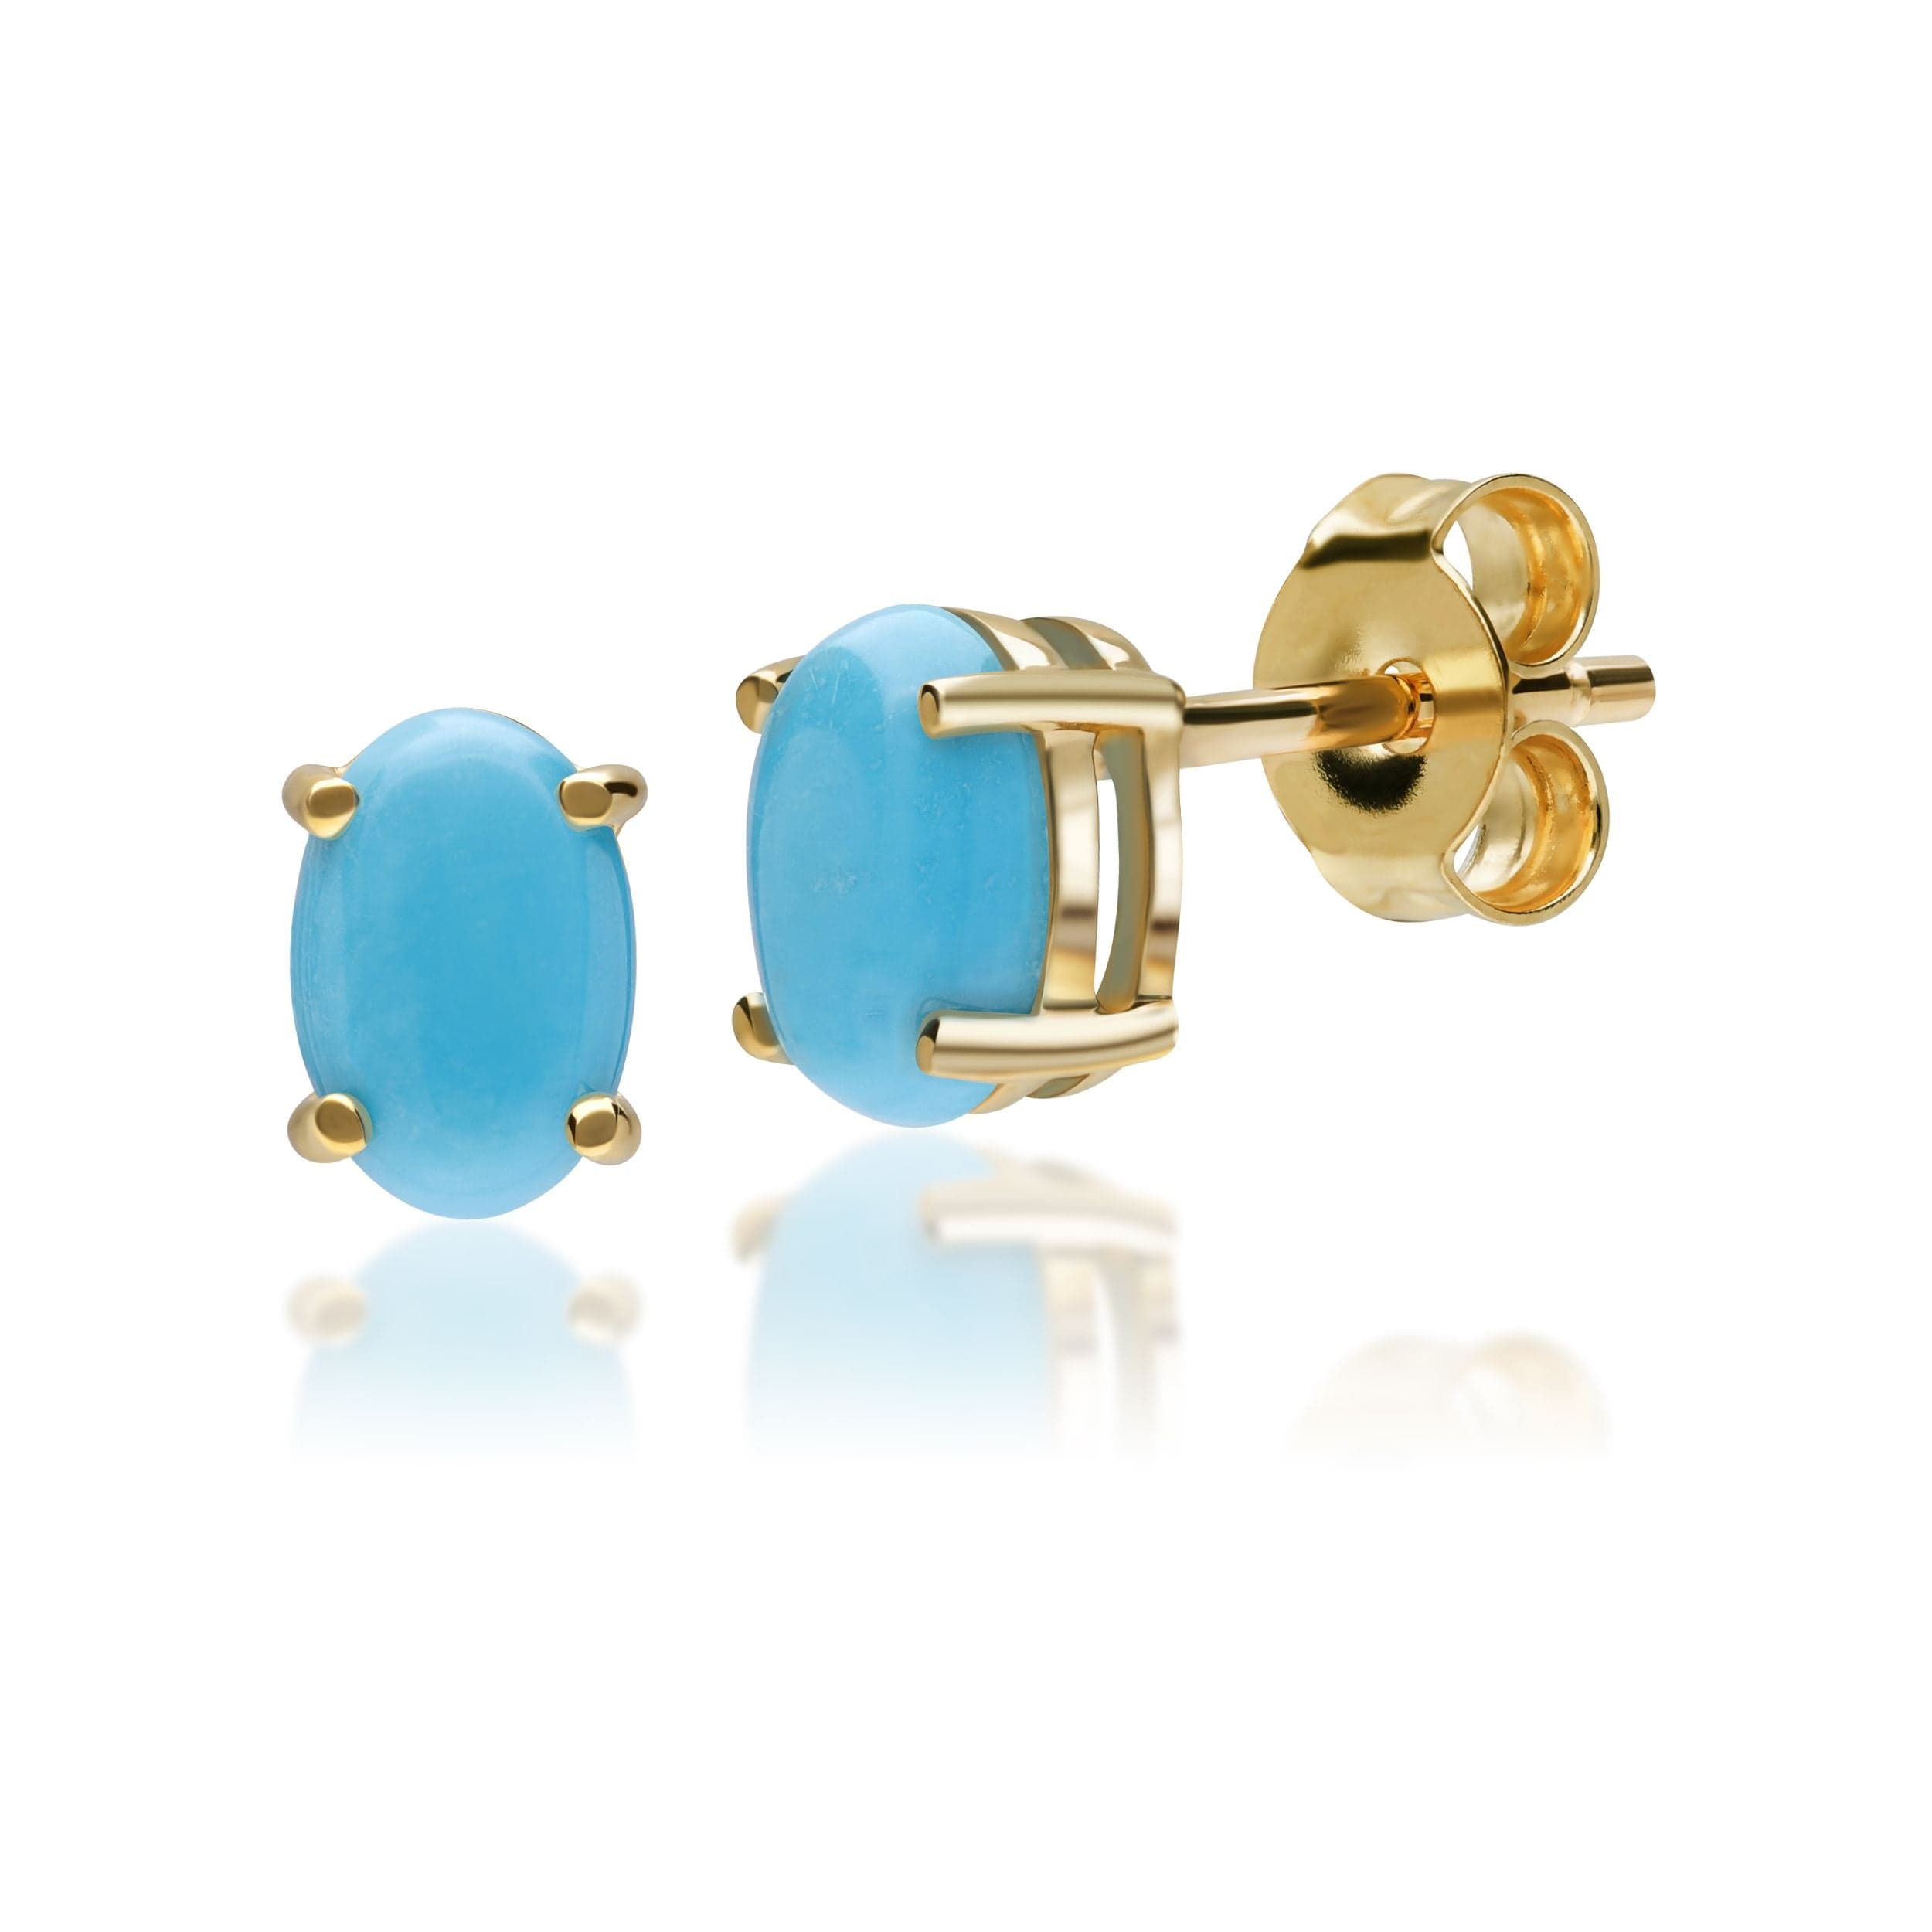 Classic Oval Turquoise Cabochon Stud Earrings in 9ct Yellow Gold 7x5mm